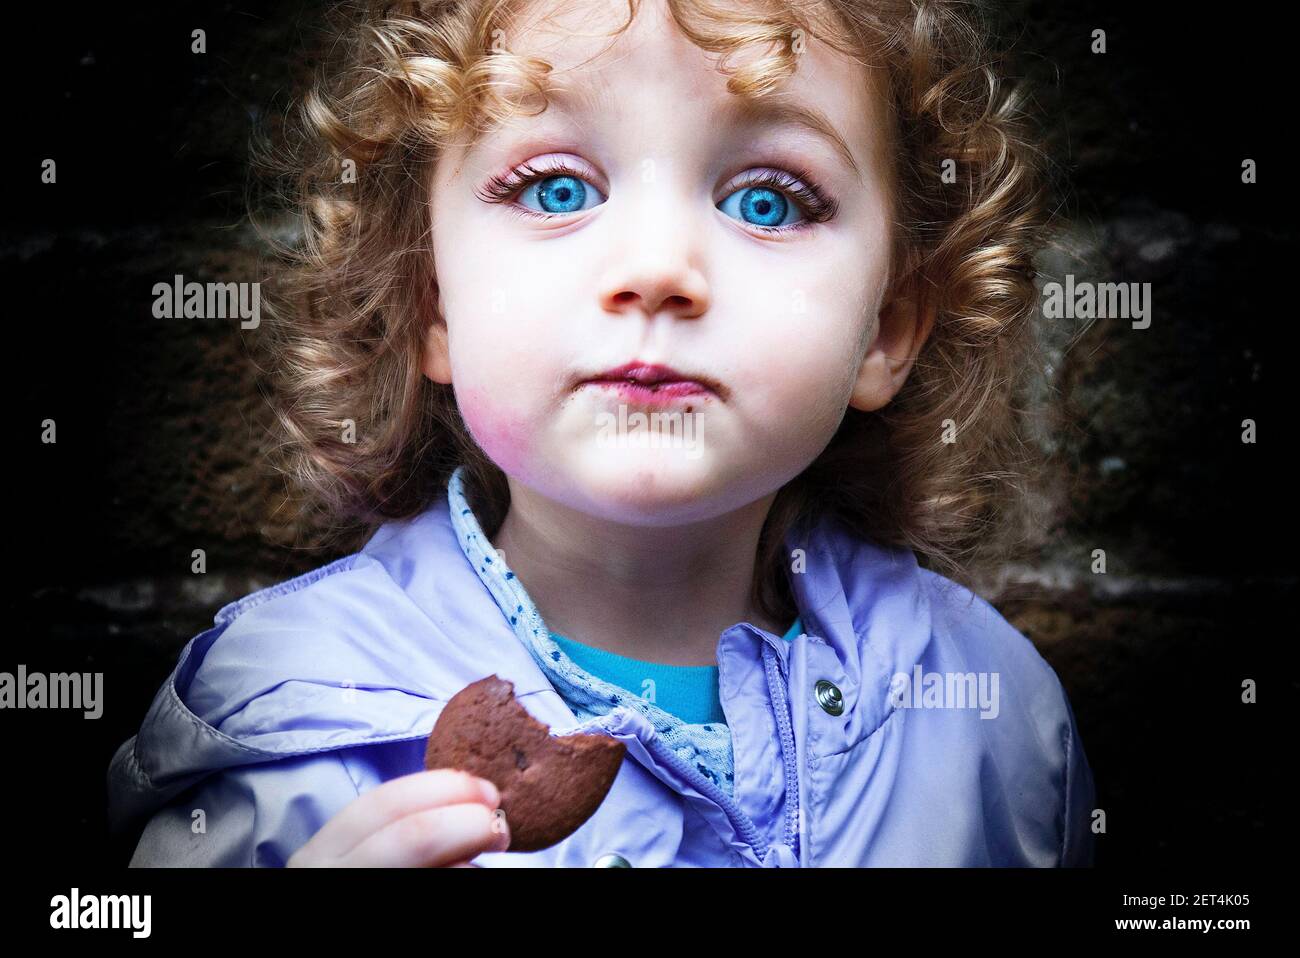 Portrait of a girl eating a chocolate cookie Stock Photo